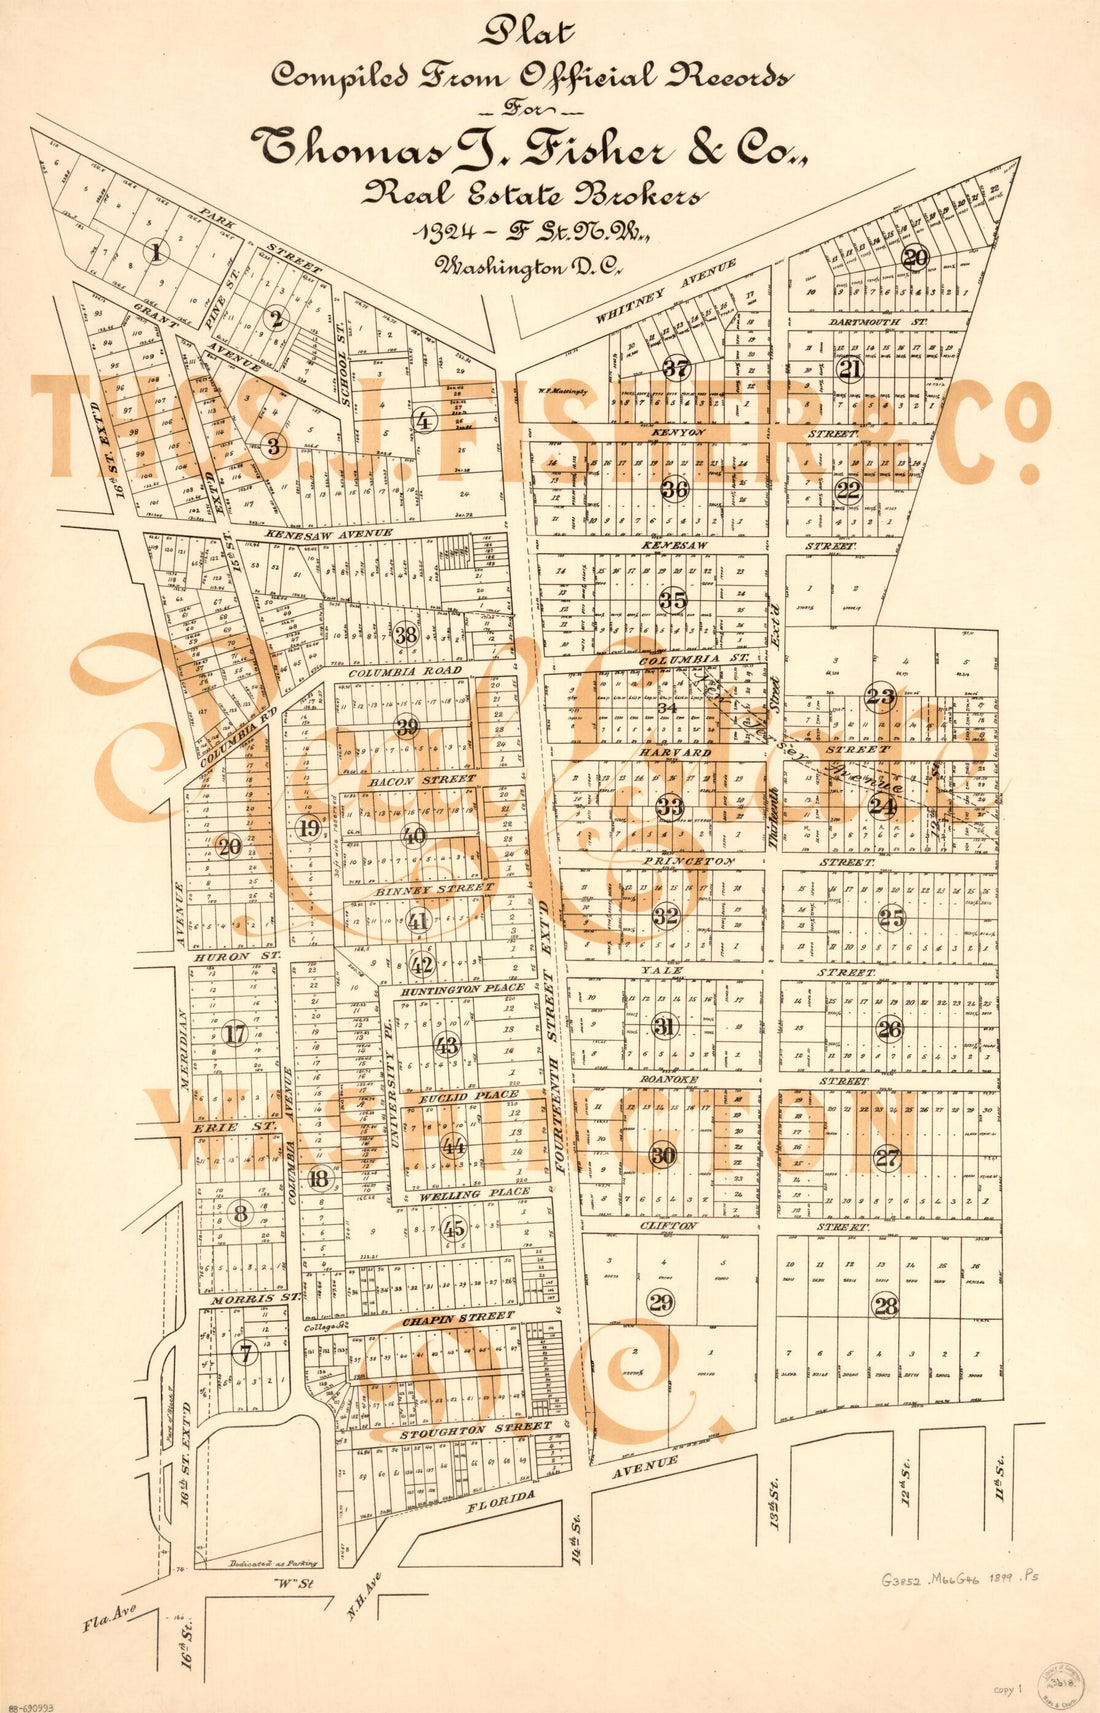 This old map of -F St. N.W., Washington D.C. : parts of Mount Pleasant, Meridian Hill, and Columbia Heights, Washington D.C. from 1899 was created by  Thos. J. Fisher and Co in 1899